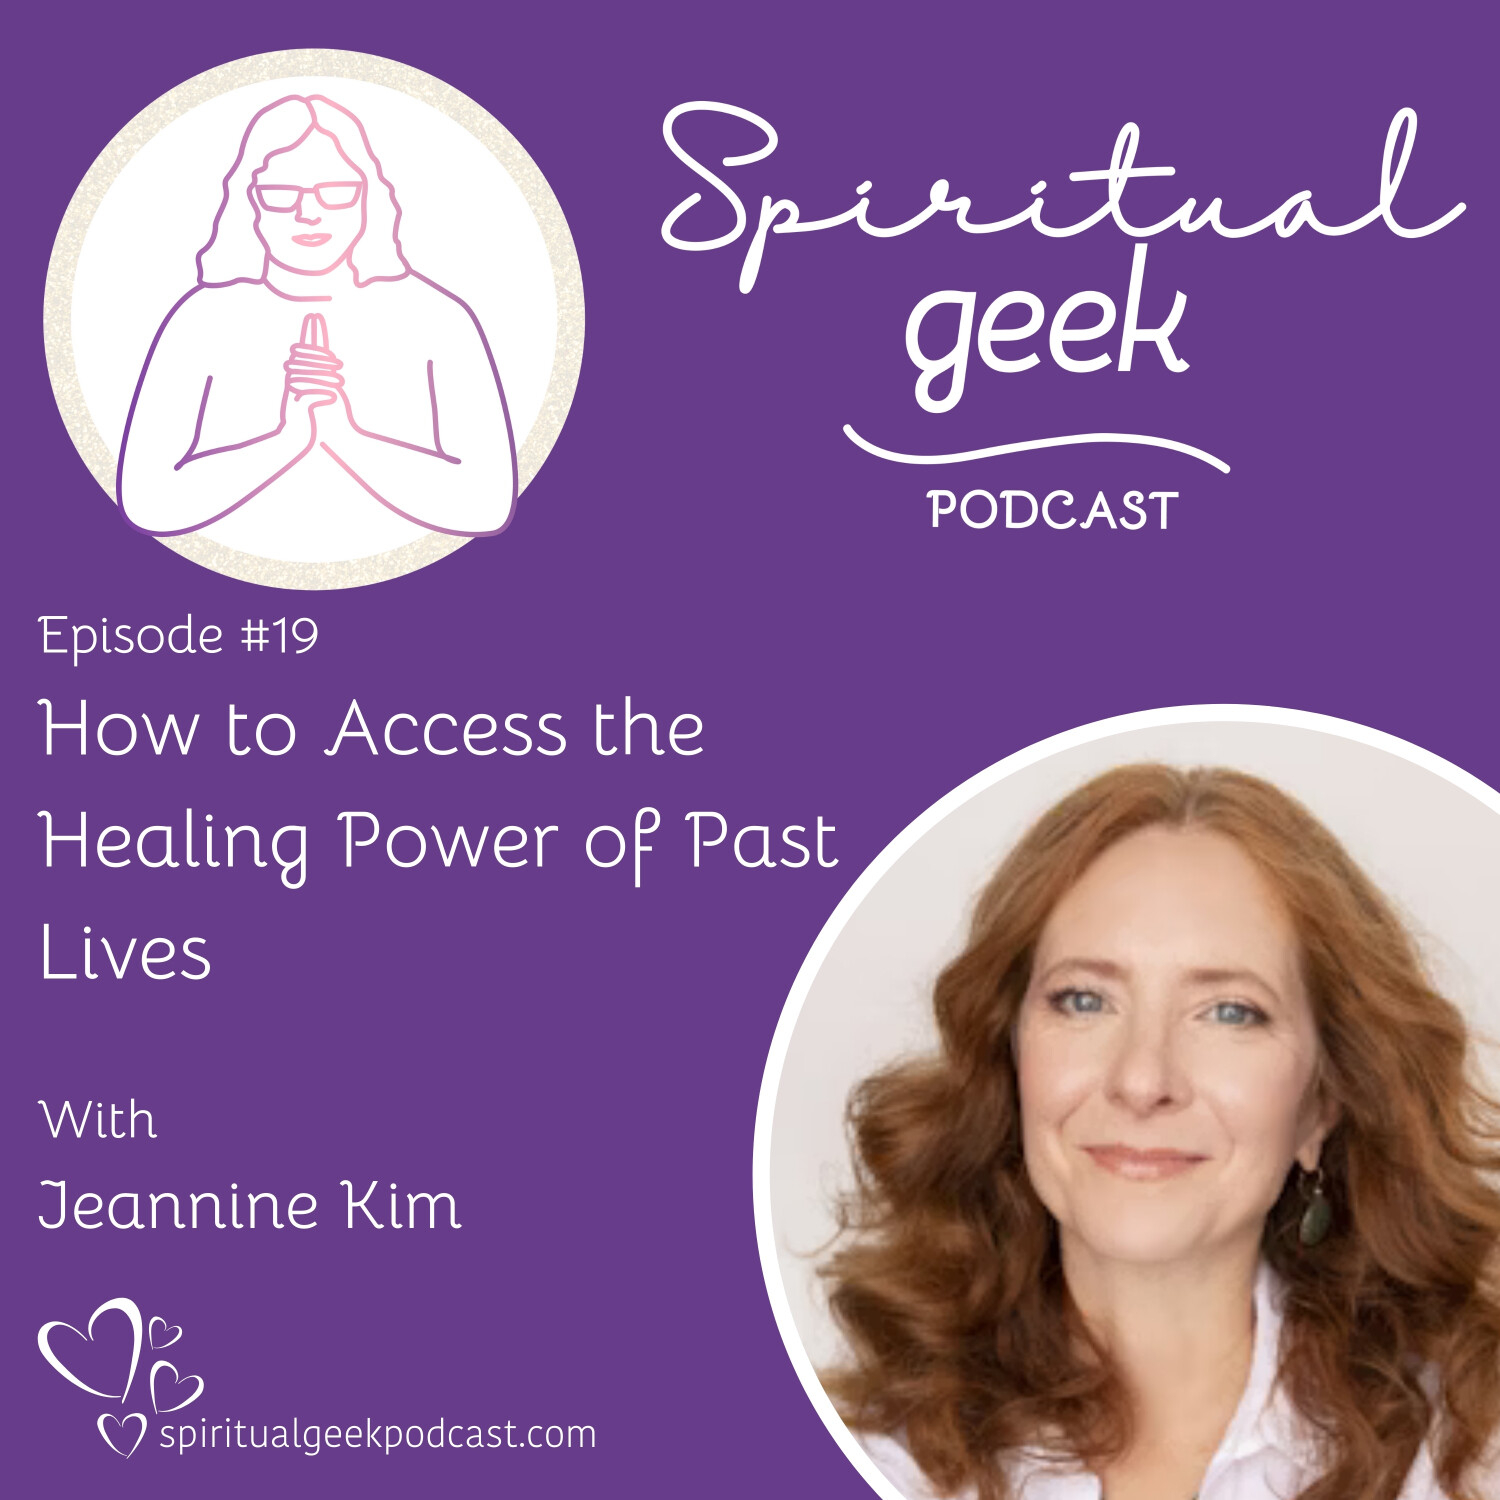 How to Access the Healing Power of Past Lives with Jeannine Kim